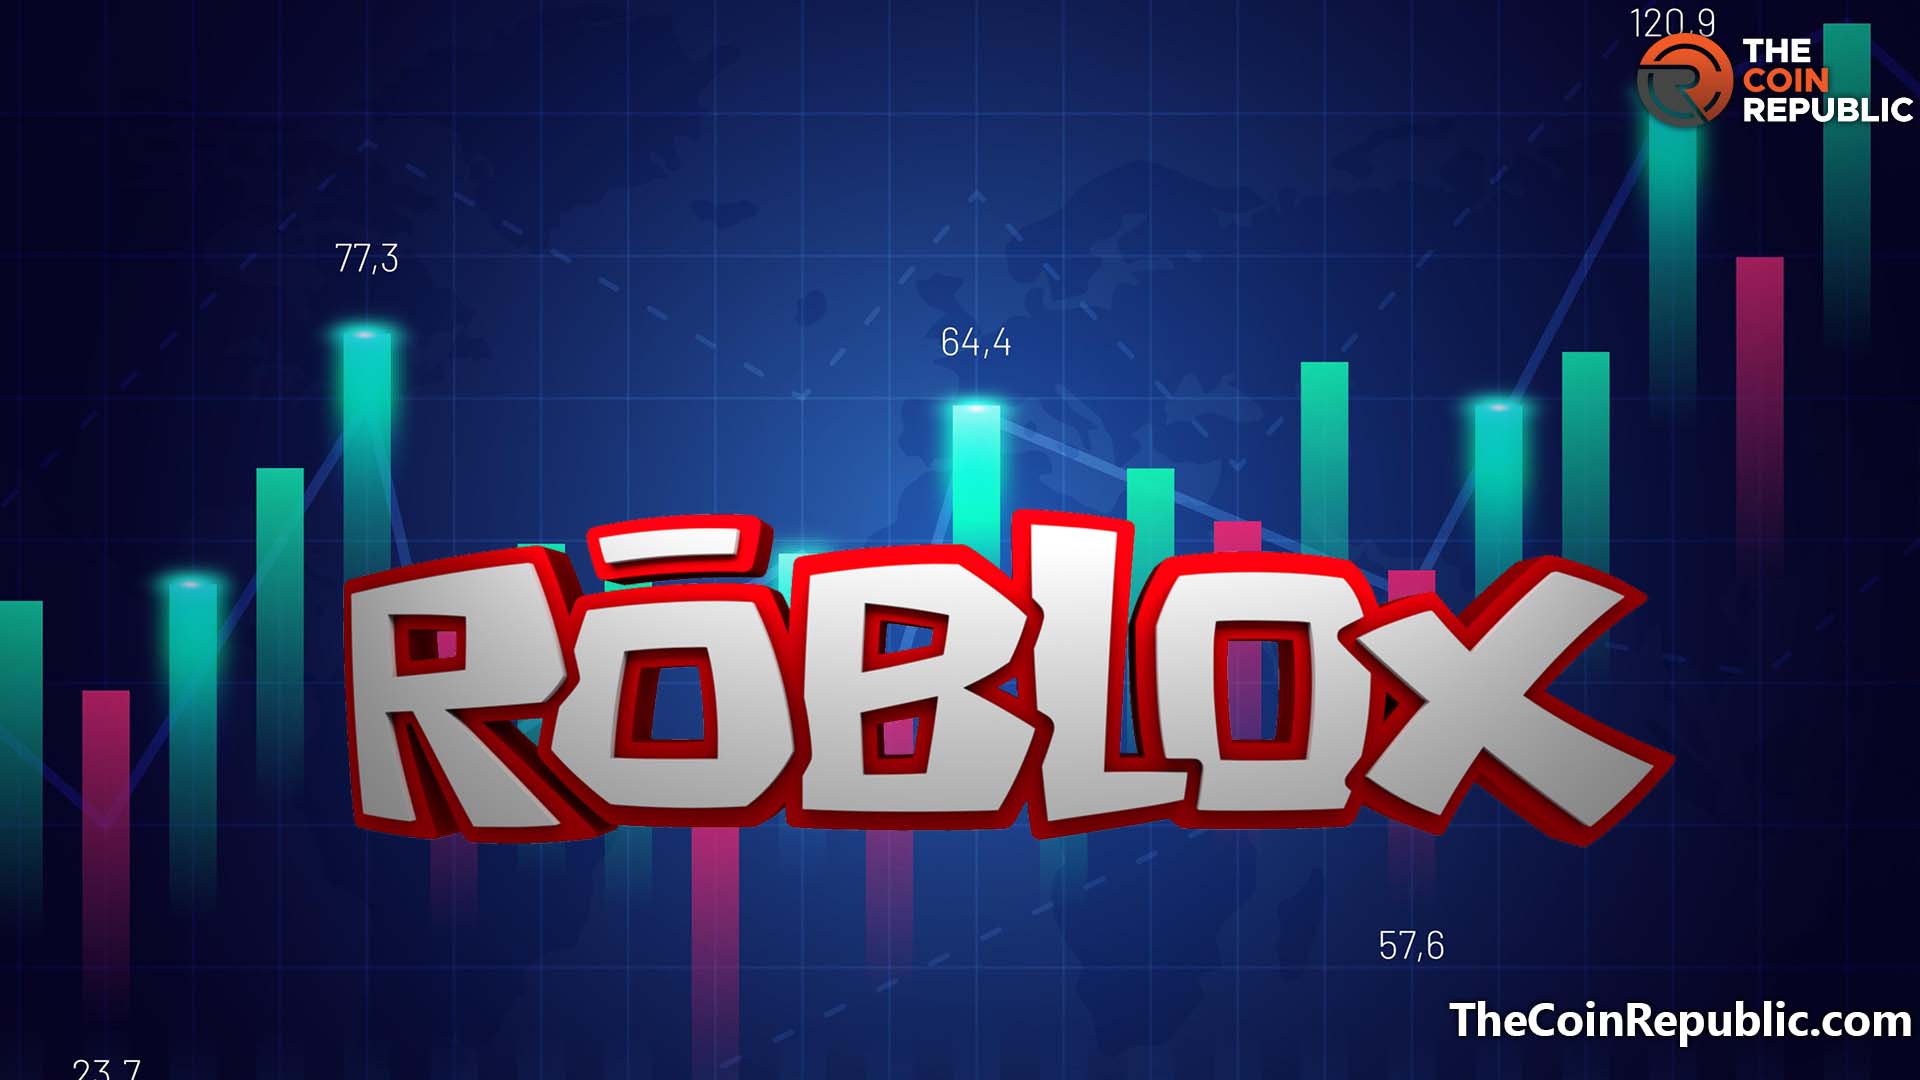 Roblox (RBLX) Stock Drops After Game Platform's Bookings Miss Estimates -  Bloomberg